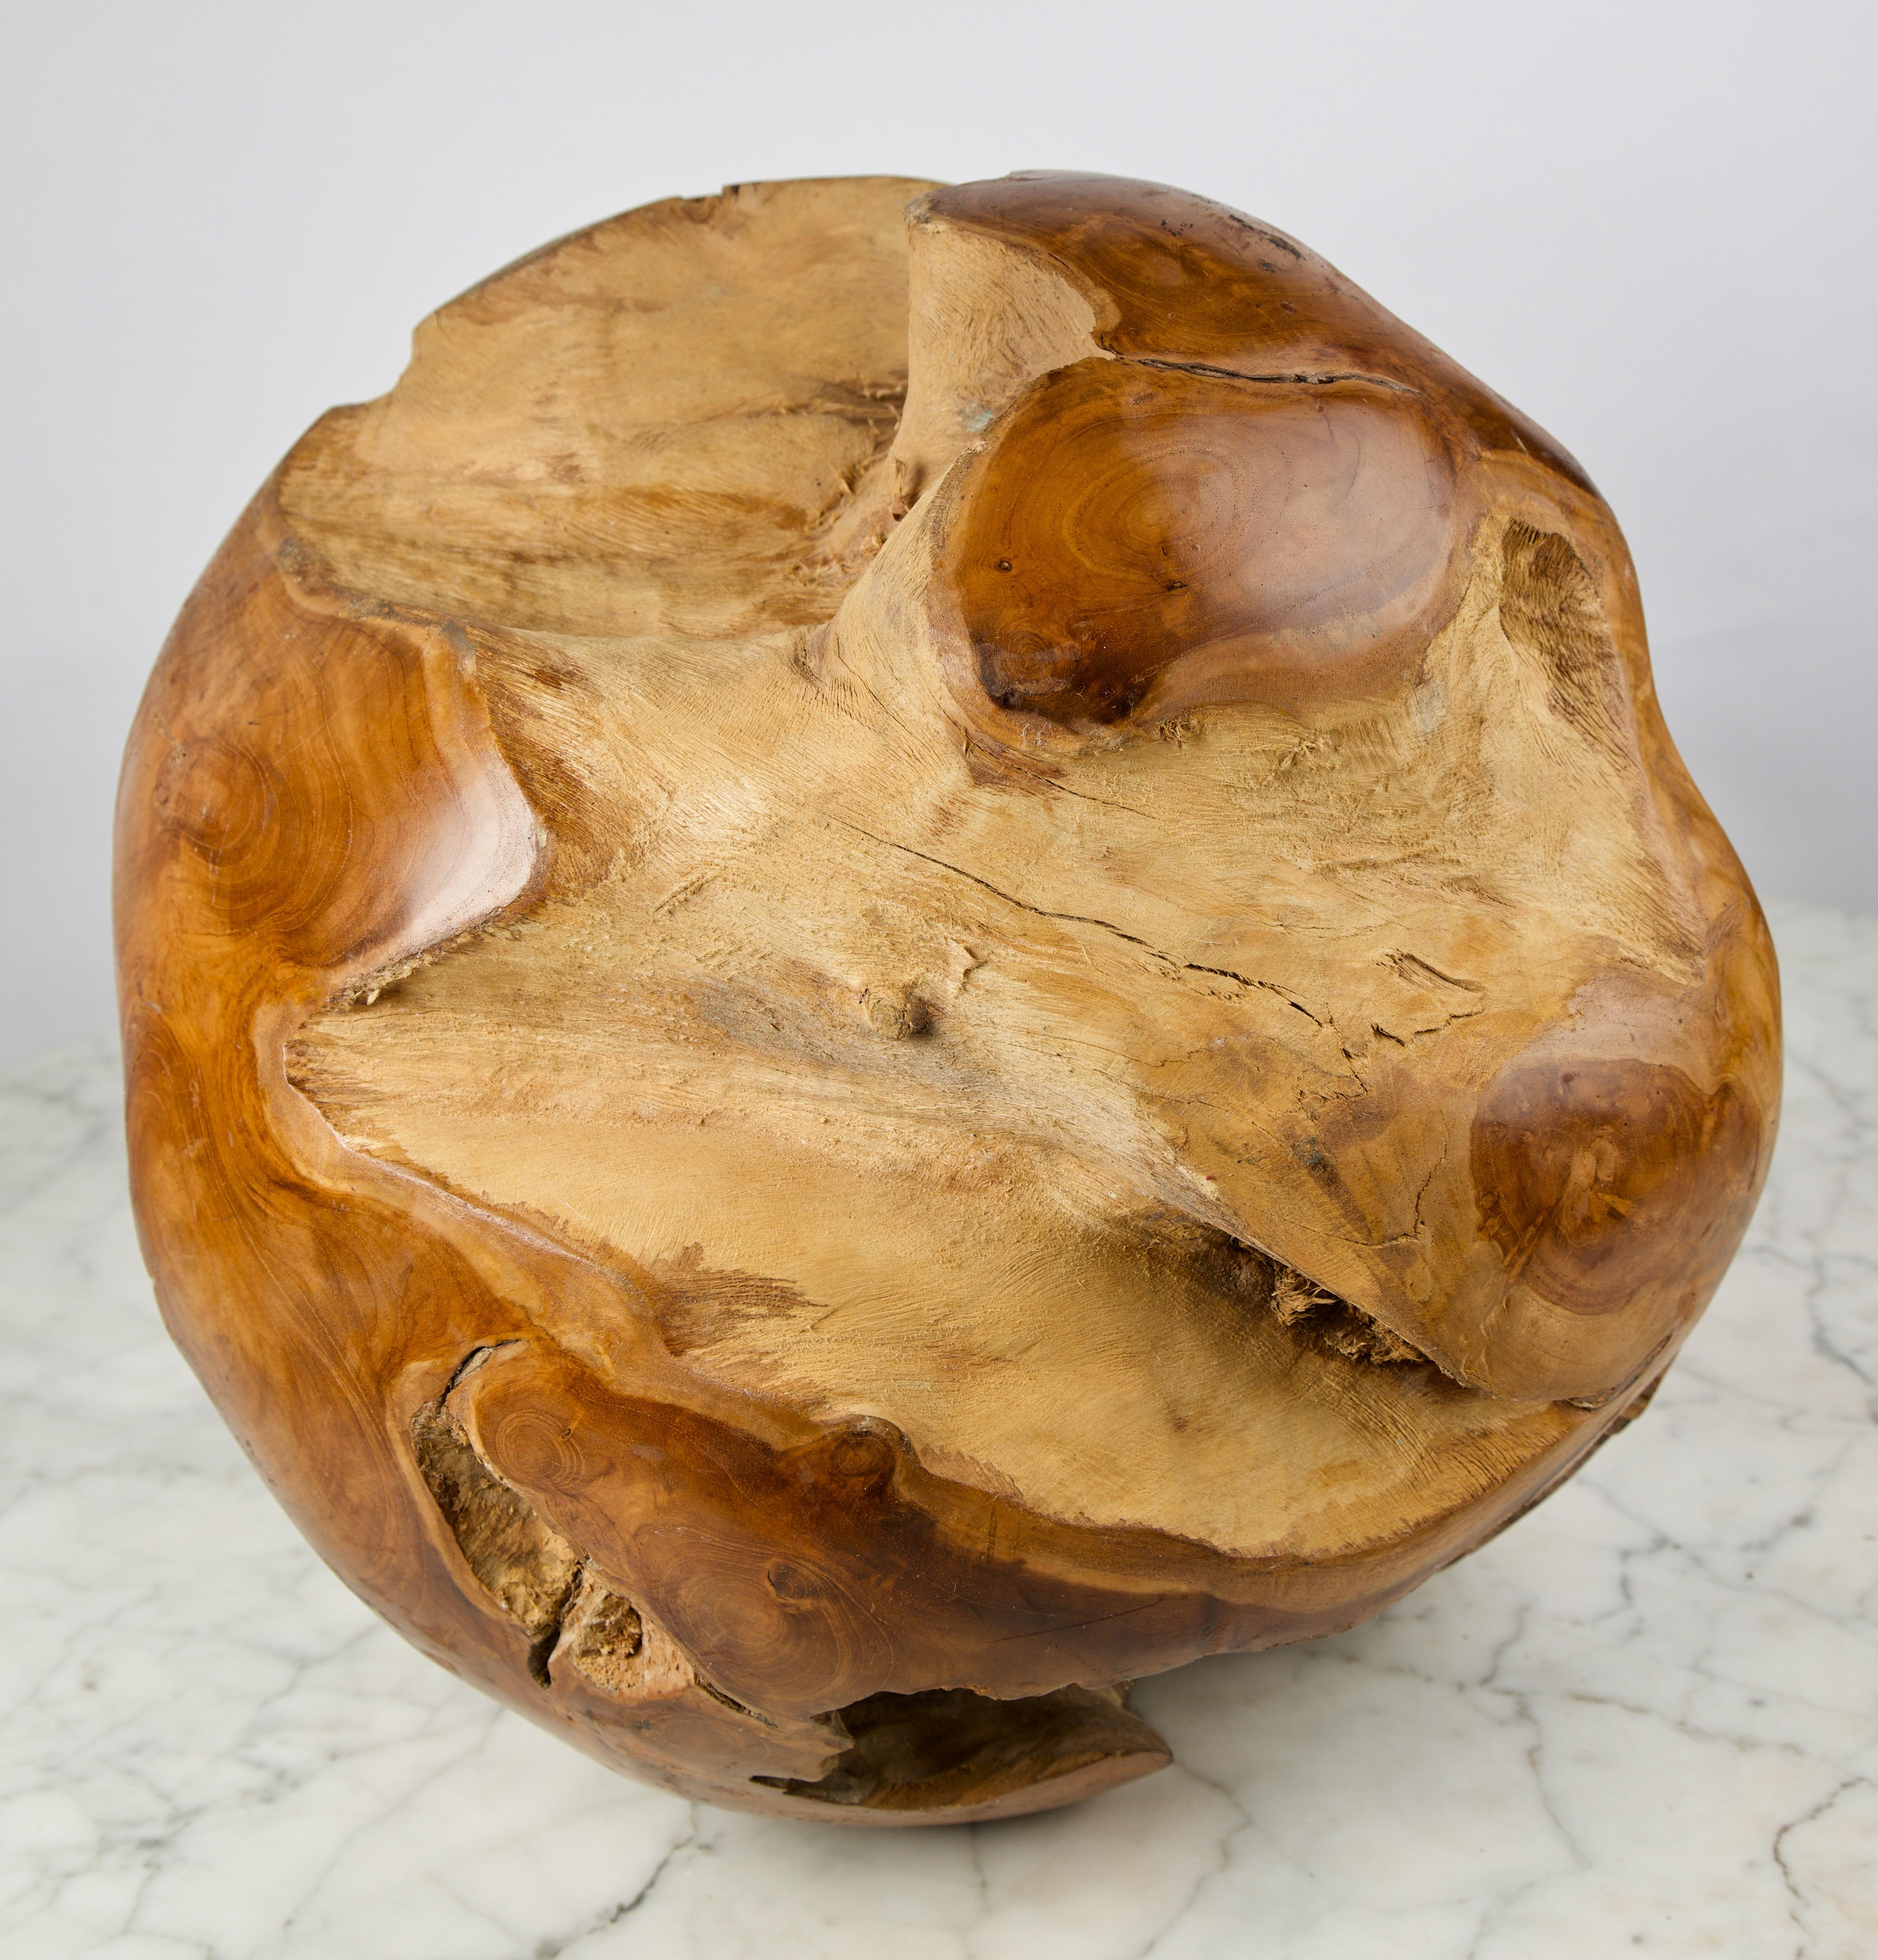 This sculpture is a hand carved reclaimed natural teak wood root sphere. The outer section is polished and the inner root left untouched in contrast. By leaving the live edge it gives the inner surface of the ball a unique organic shape and